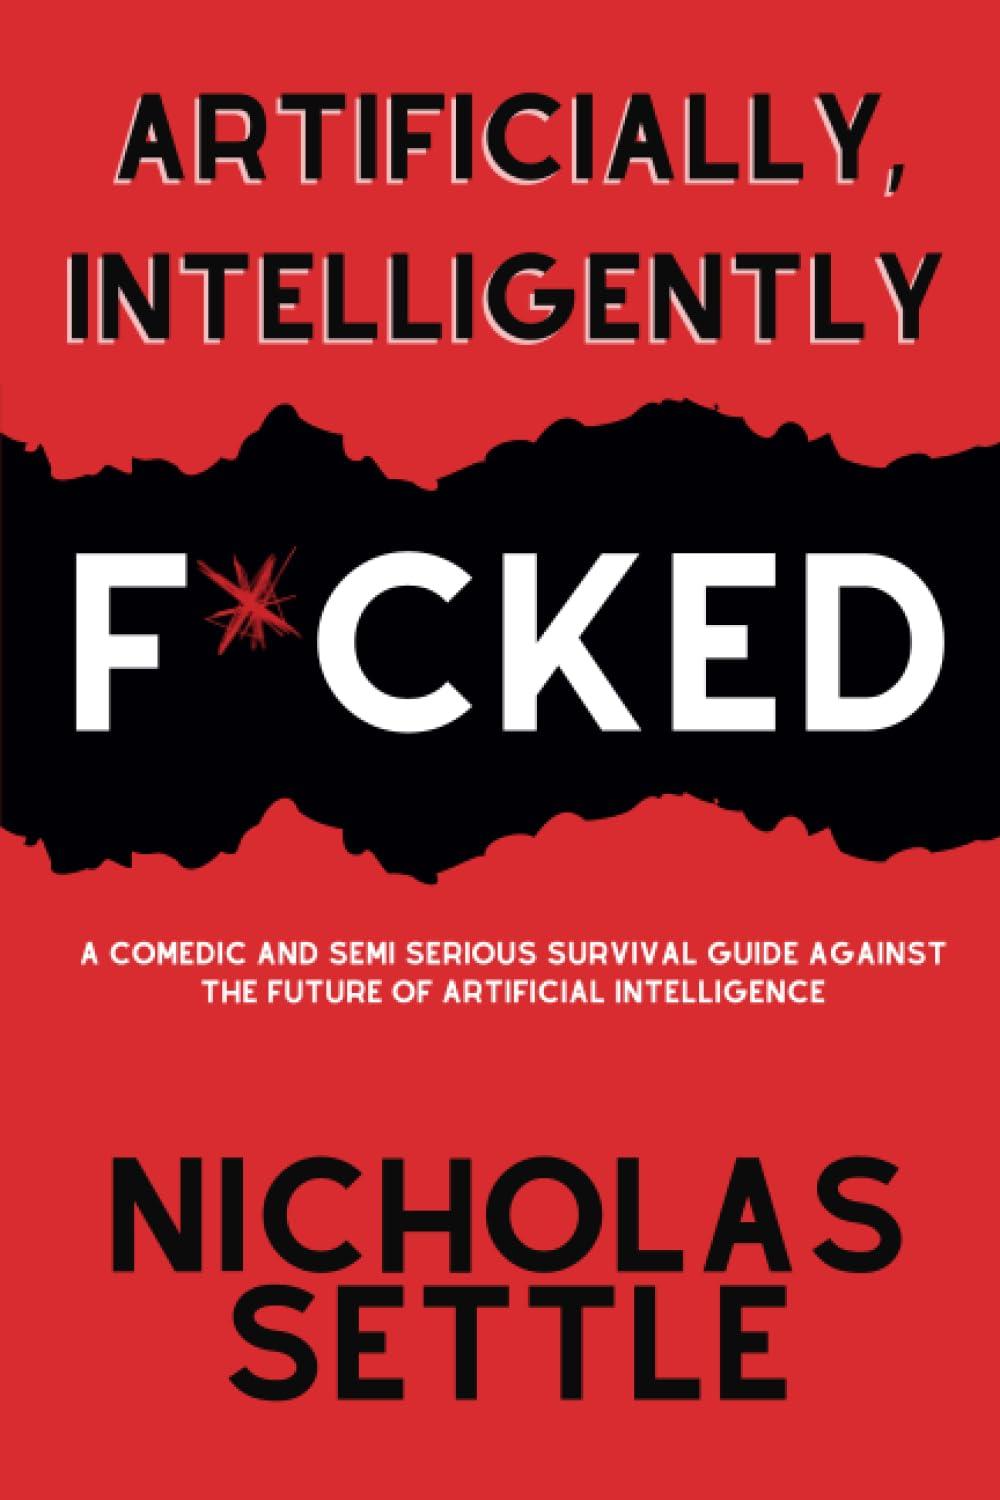 Artificially Intelligently F*cked A Comedic And Semi Serious Survival Guide Against The Future Of Artificial Intelligence